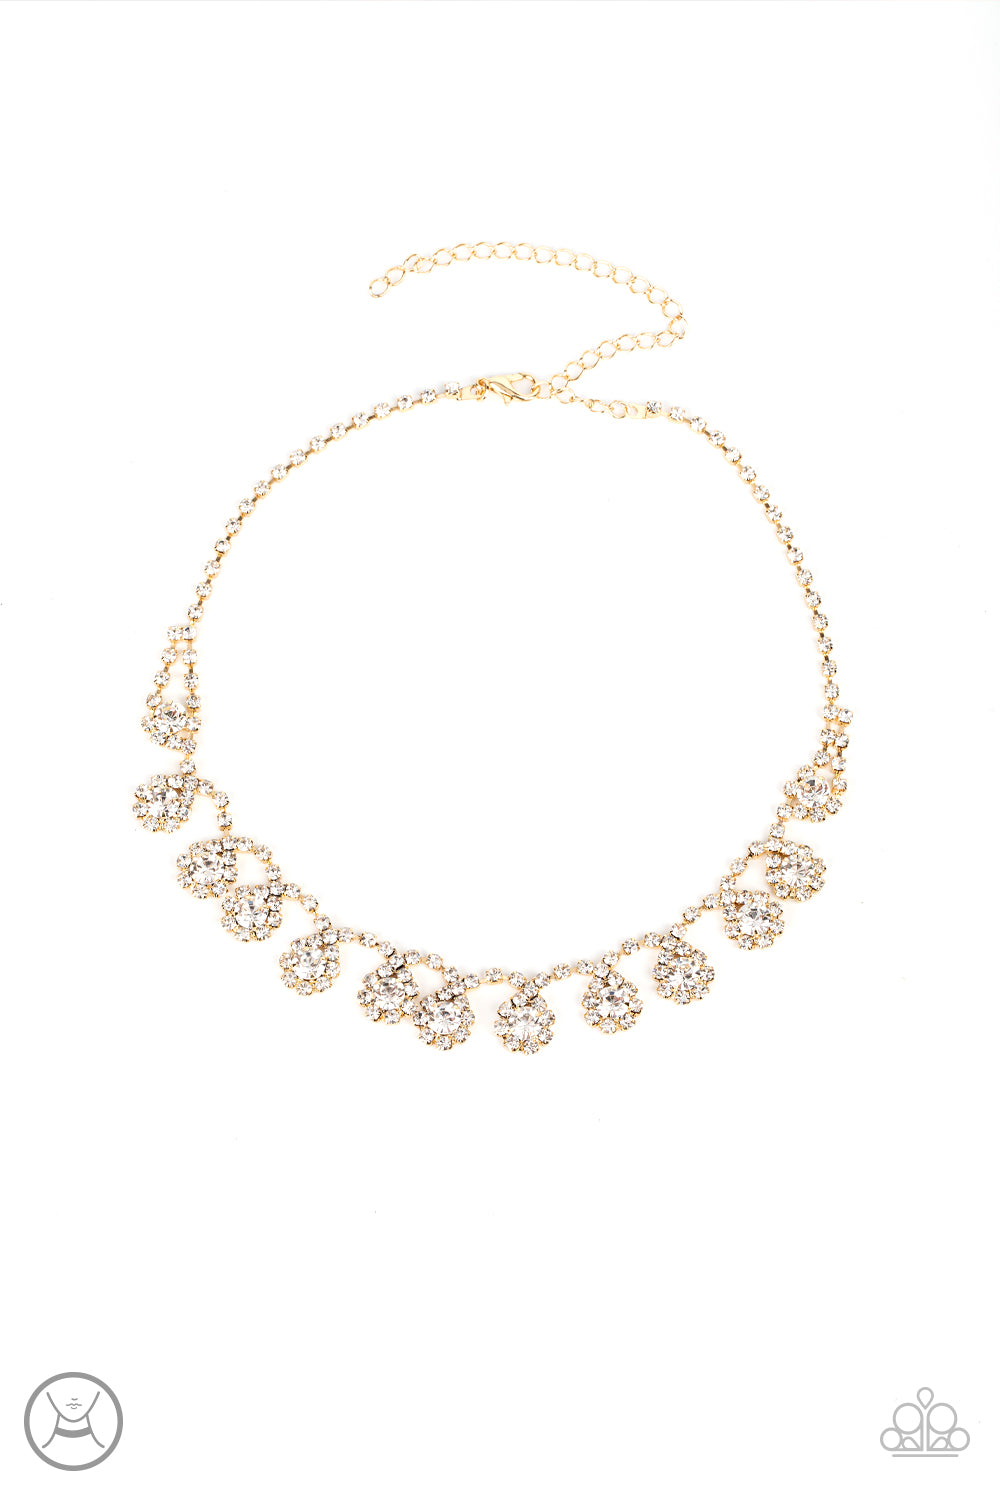 Princess Prominence Gold Choker Necklace - Paparazzi Accessories  A dainty strand of glittery white rhinestones encircle solitaire white rhinestones around the neck, creating a golden fringe. Features an adjustable clasp closure.  Sold as one individual choker necklace. Includes one pair of matching earrings.